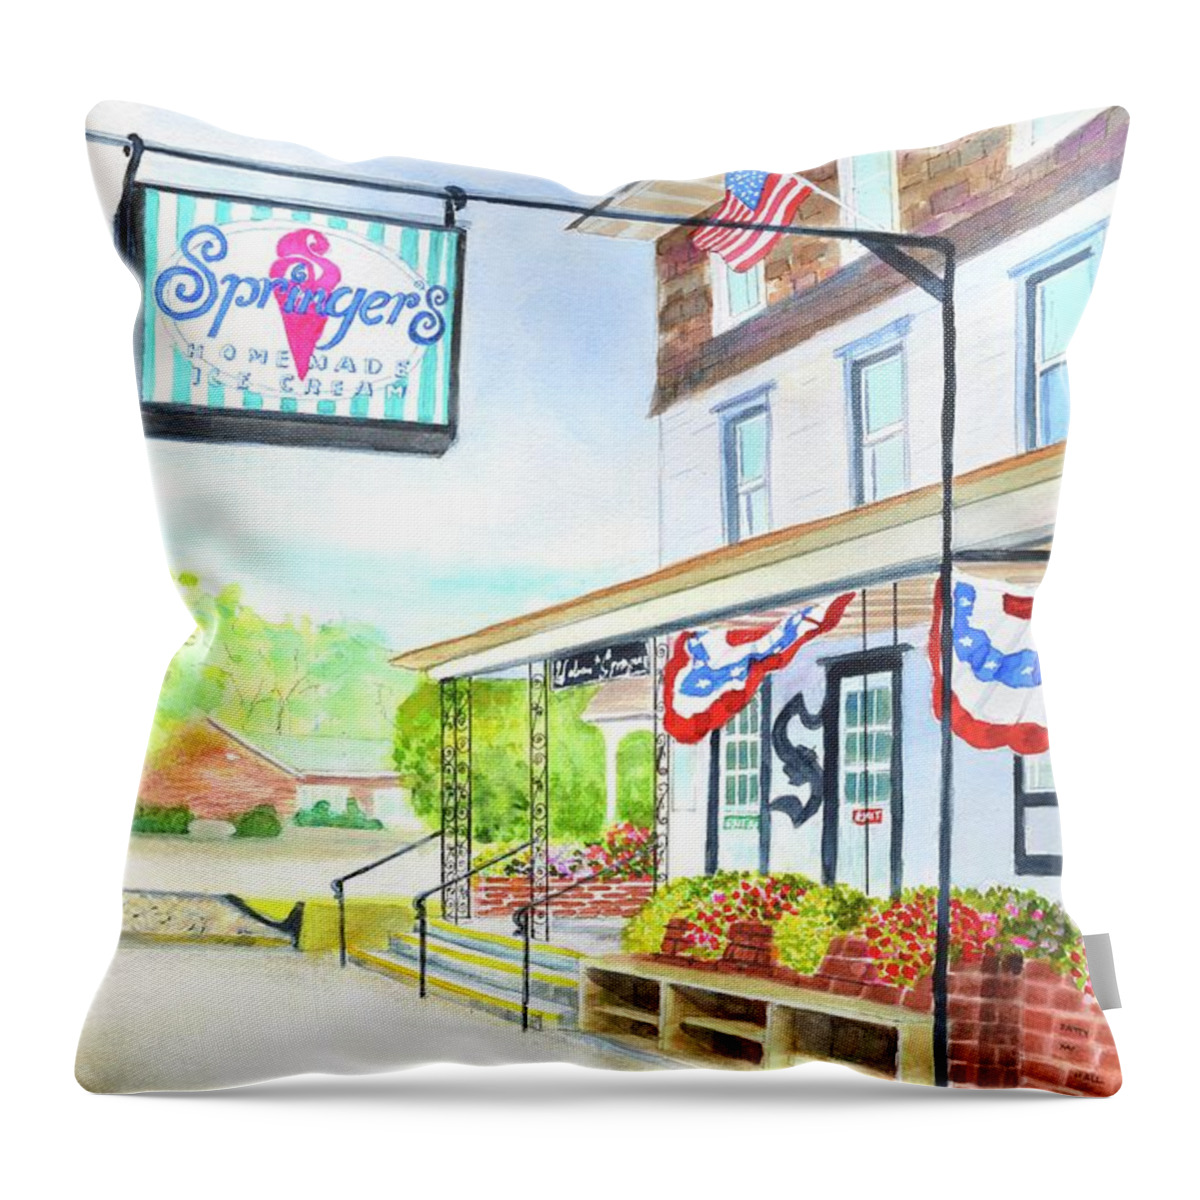 Springer's Ice Cream Throw Pillow featuring the painting Springer's Ice Cream Stone Harbor NJ by Patty Kay Hall